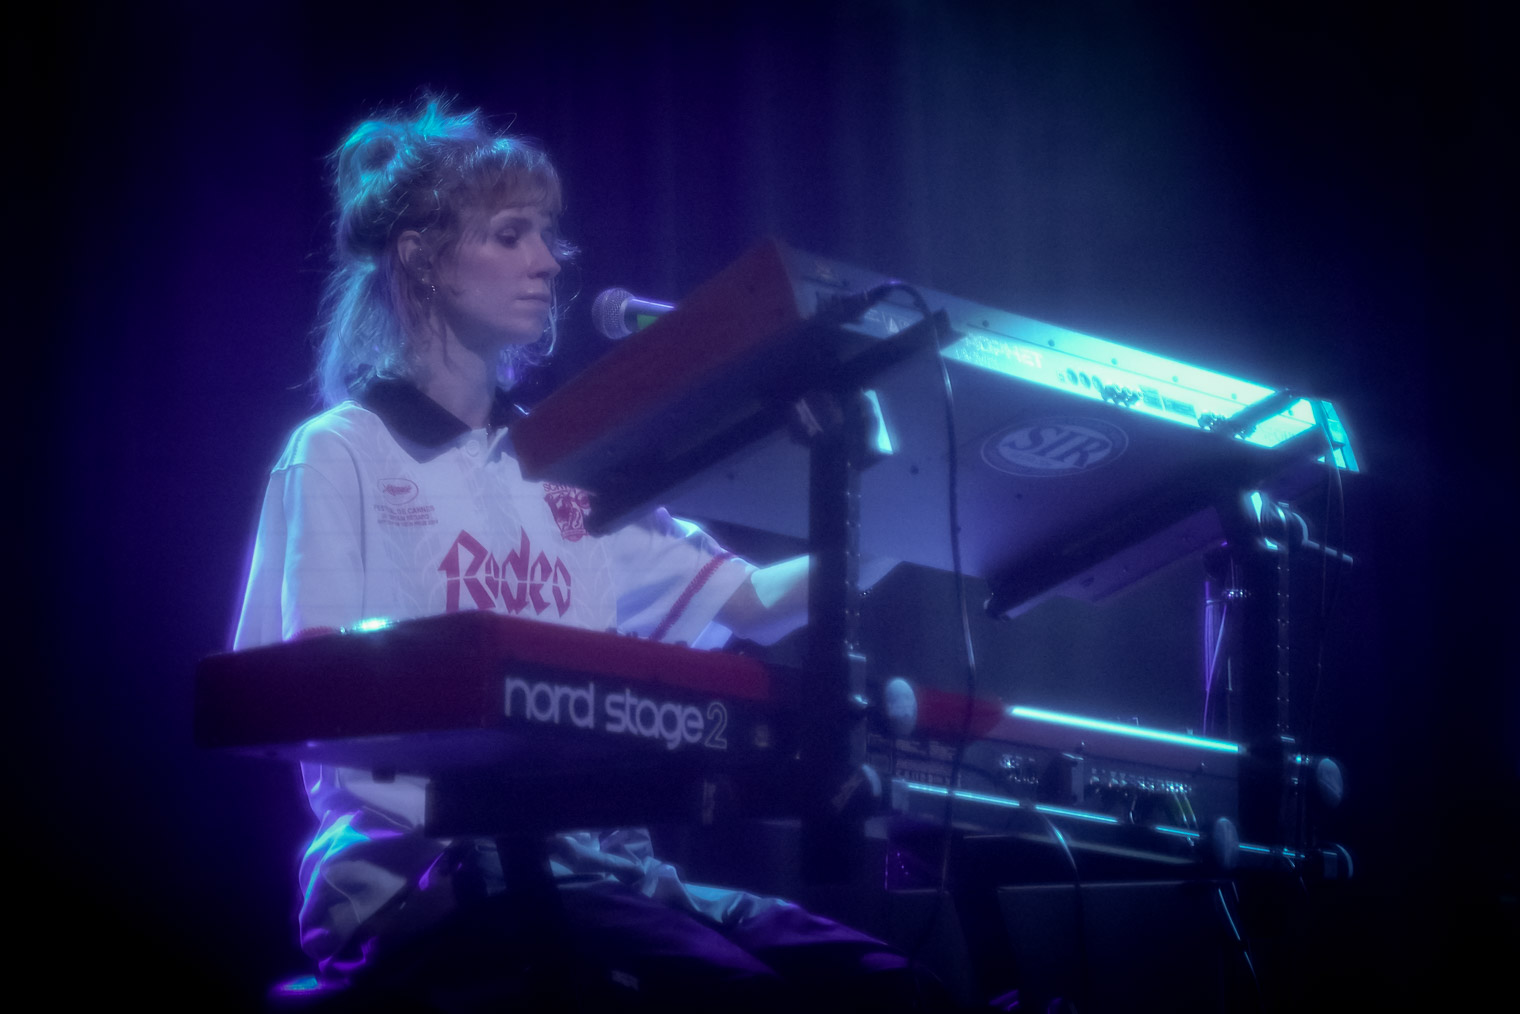 A musician on stage playing keyboards